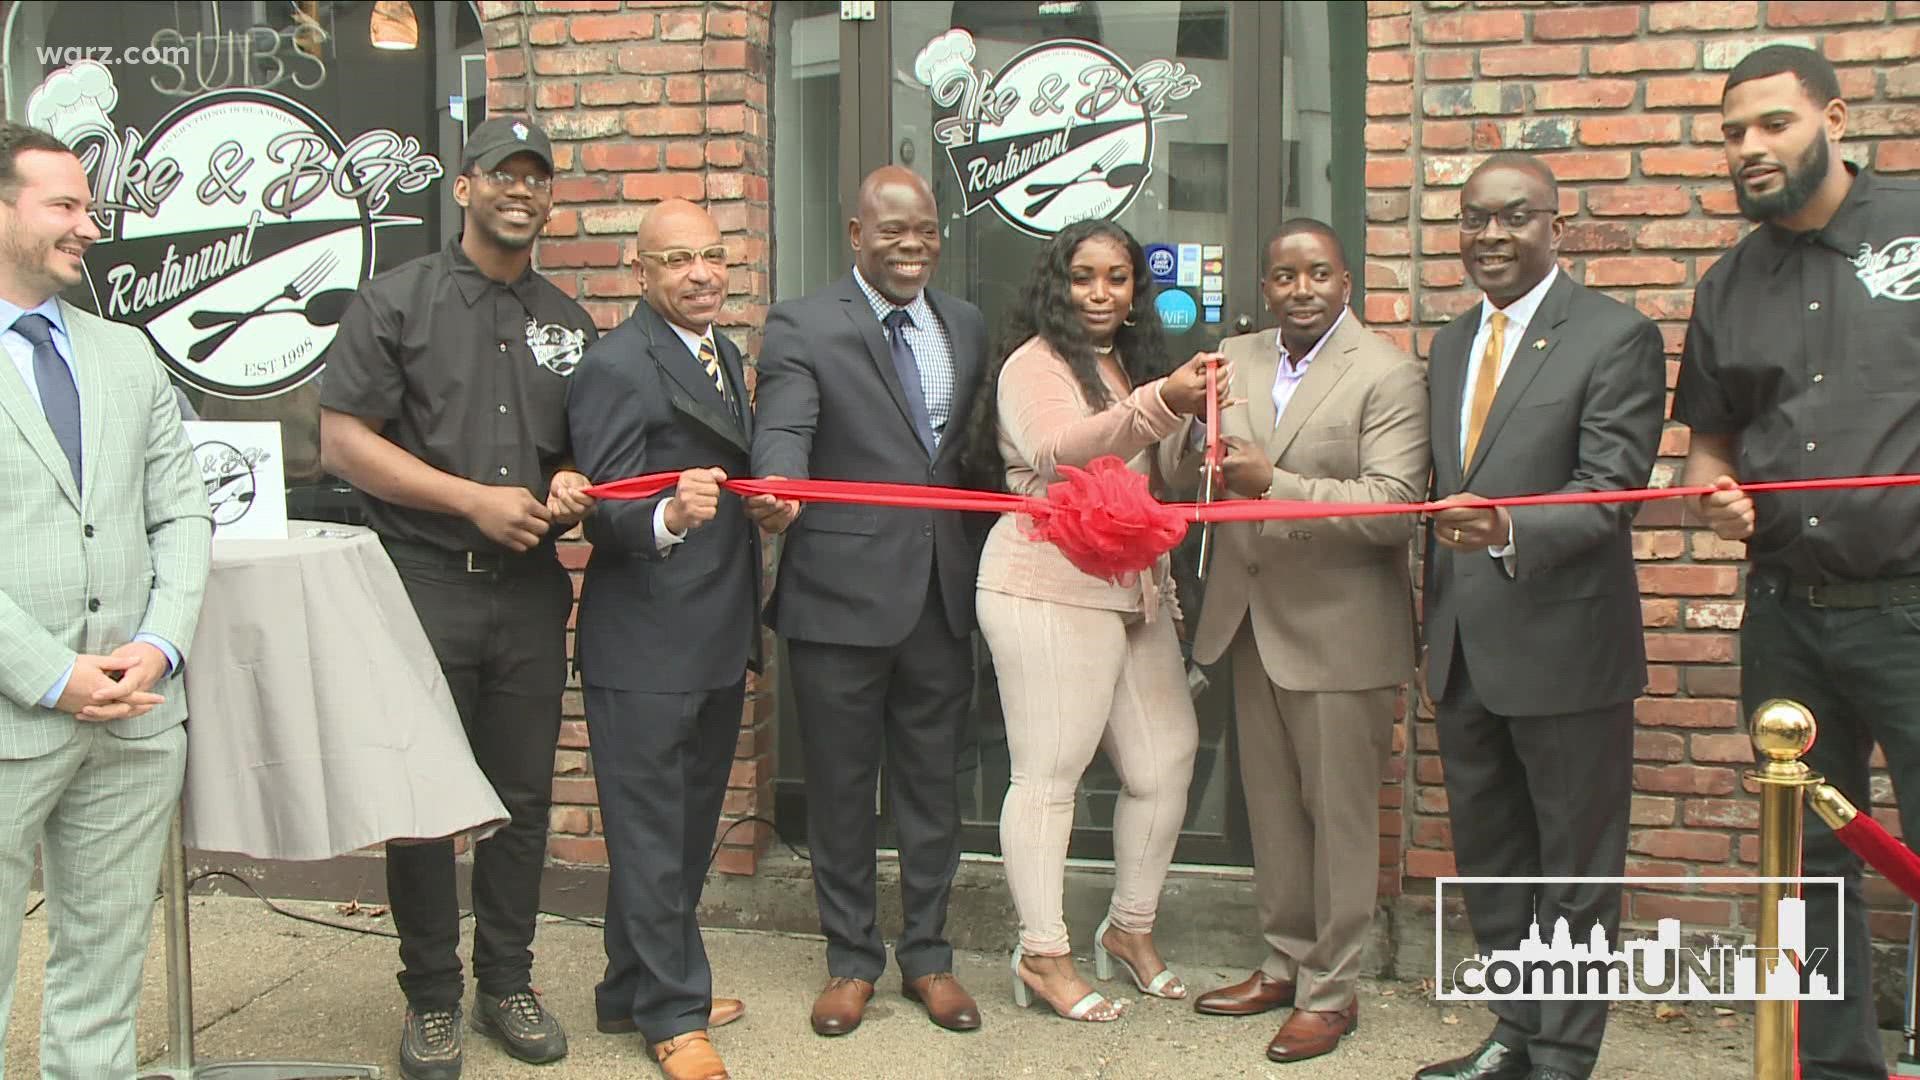 This is the time of year when families will gather together and eat. Ike and BG's Restaurant has expanded from one to two restaurants in Buffalo.